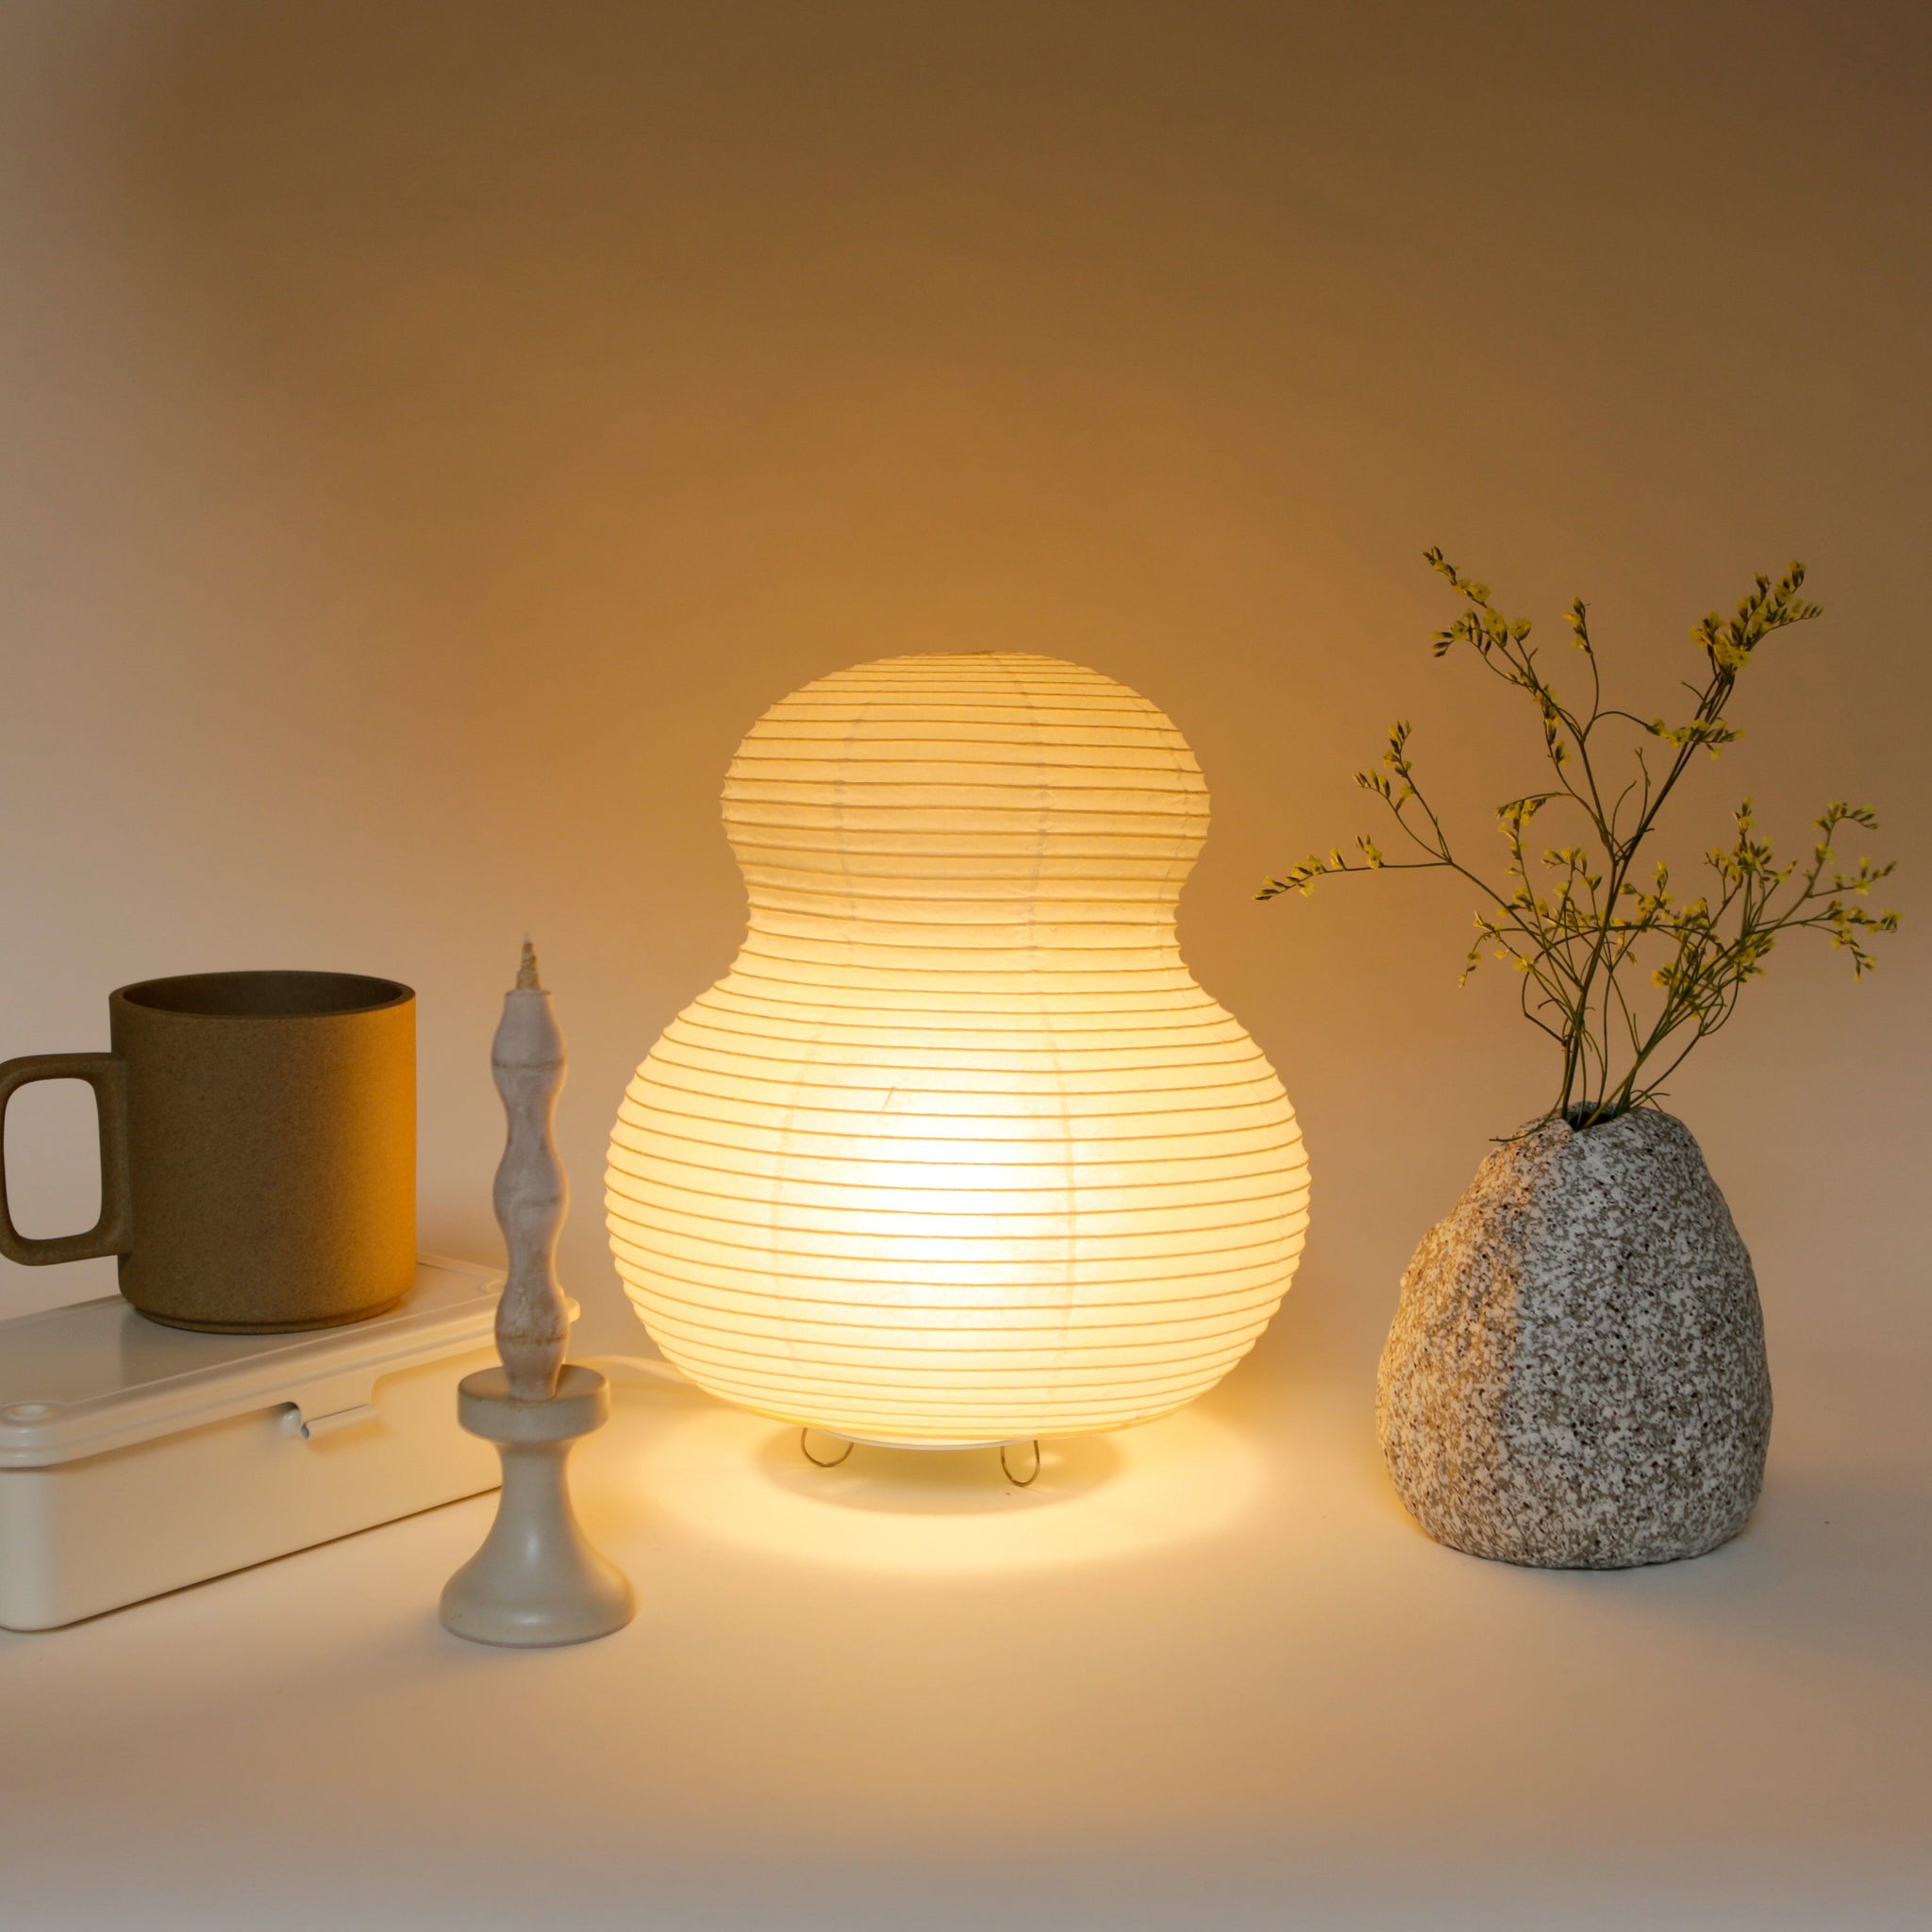 The Gourd  - Paper Moon Table Lamp, No. 2